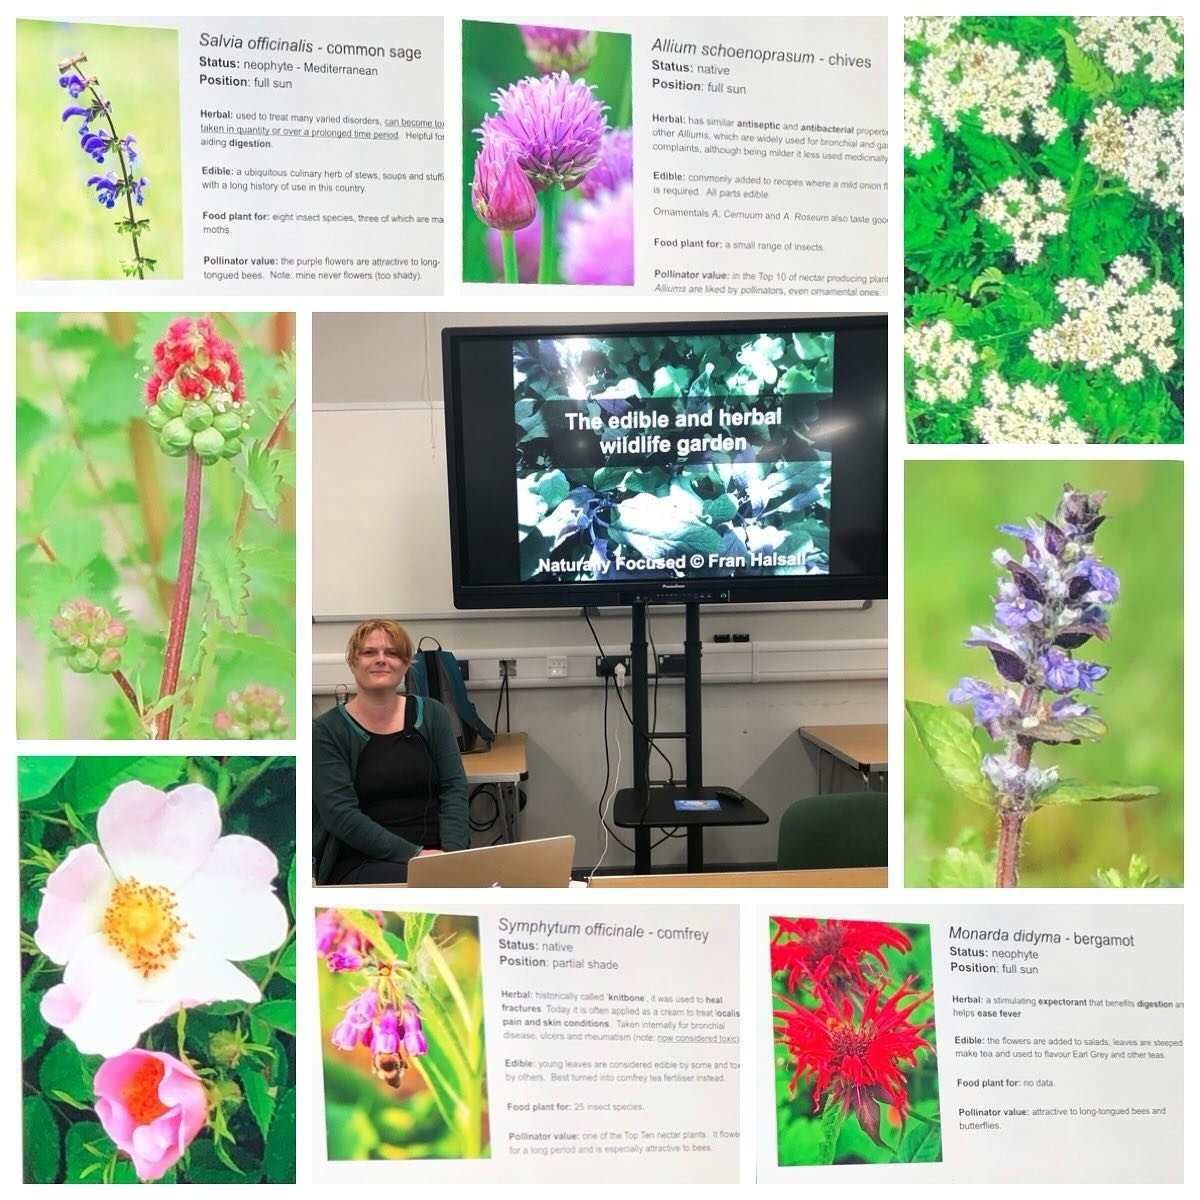 We spent a very enjoyable Monday evening at #sheffieldbotanicalgardens in the company of Fran Halsall who shared her huge knowledge of edible herbal plants that we can grow (or may already grow) in our gardens.

Fran is a very enthusiastic and knowle